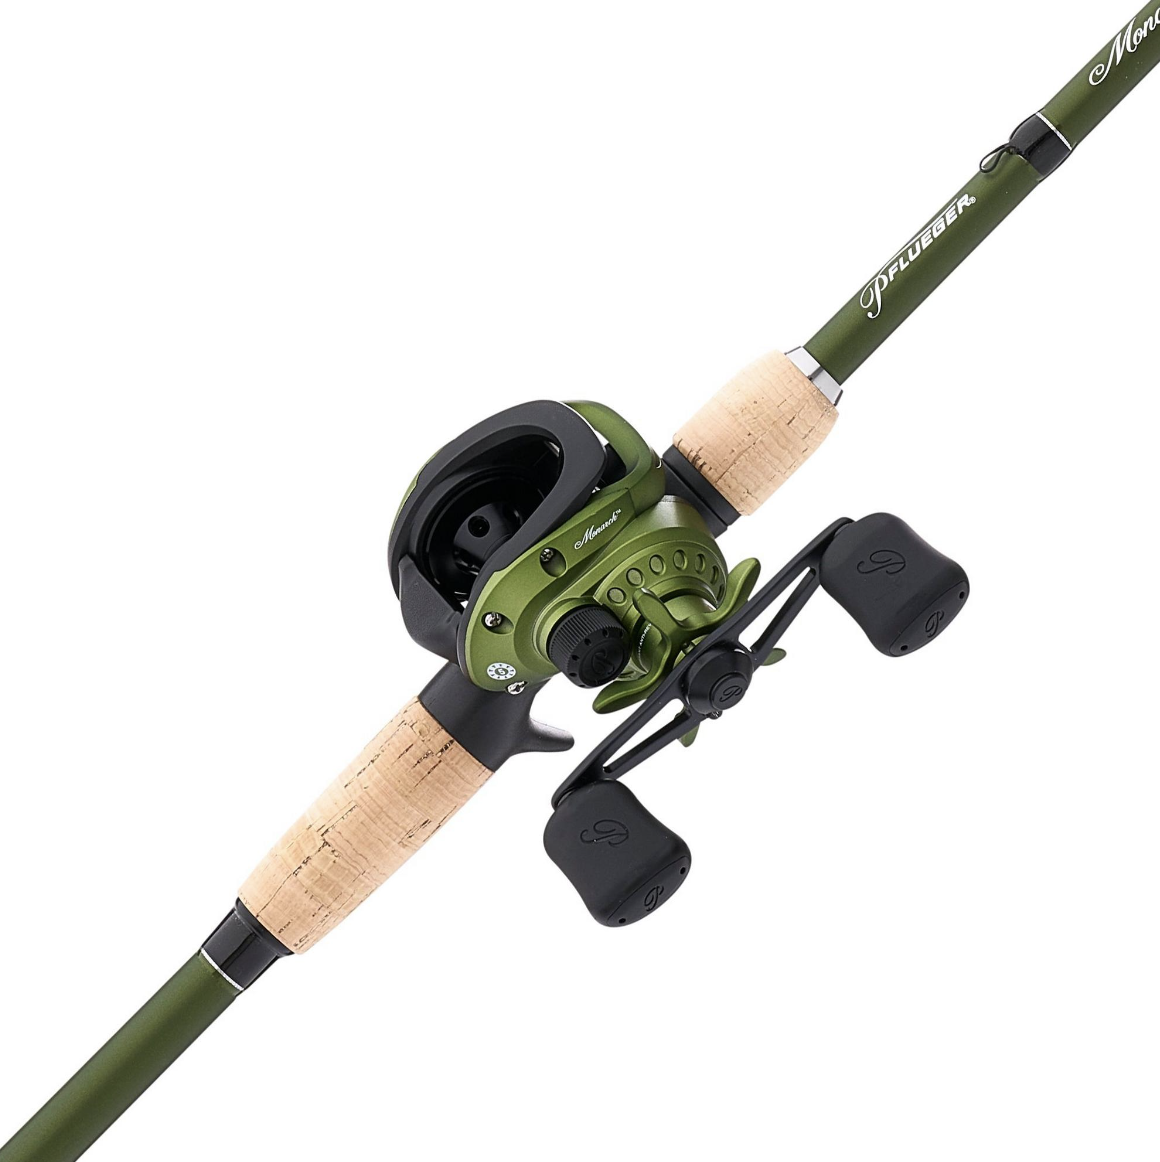 The Cheapest ROD & REEL Baitcaster COMBO from